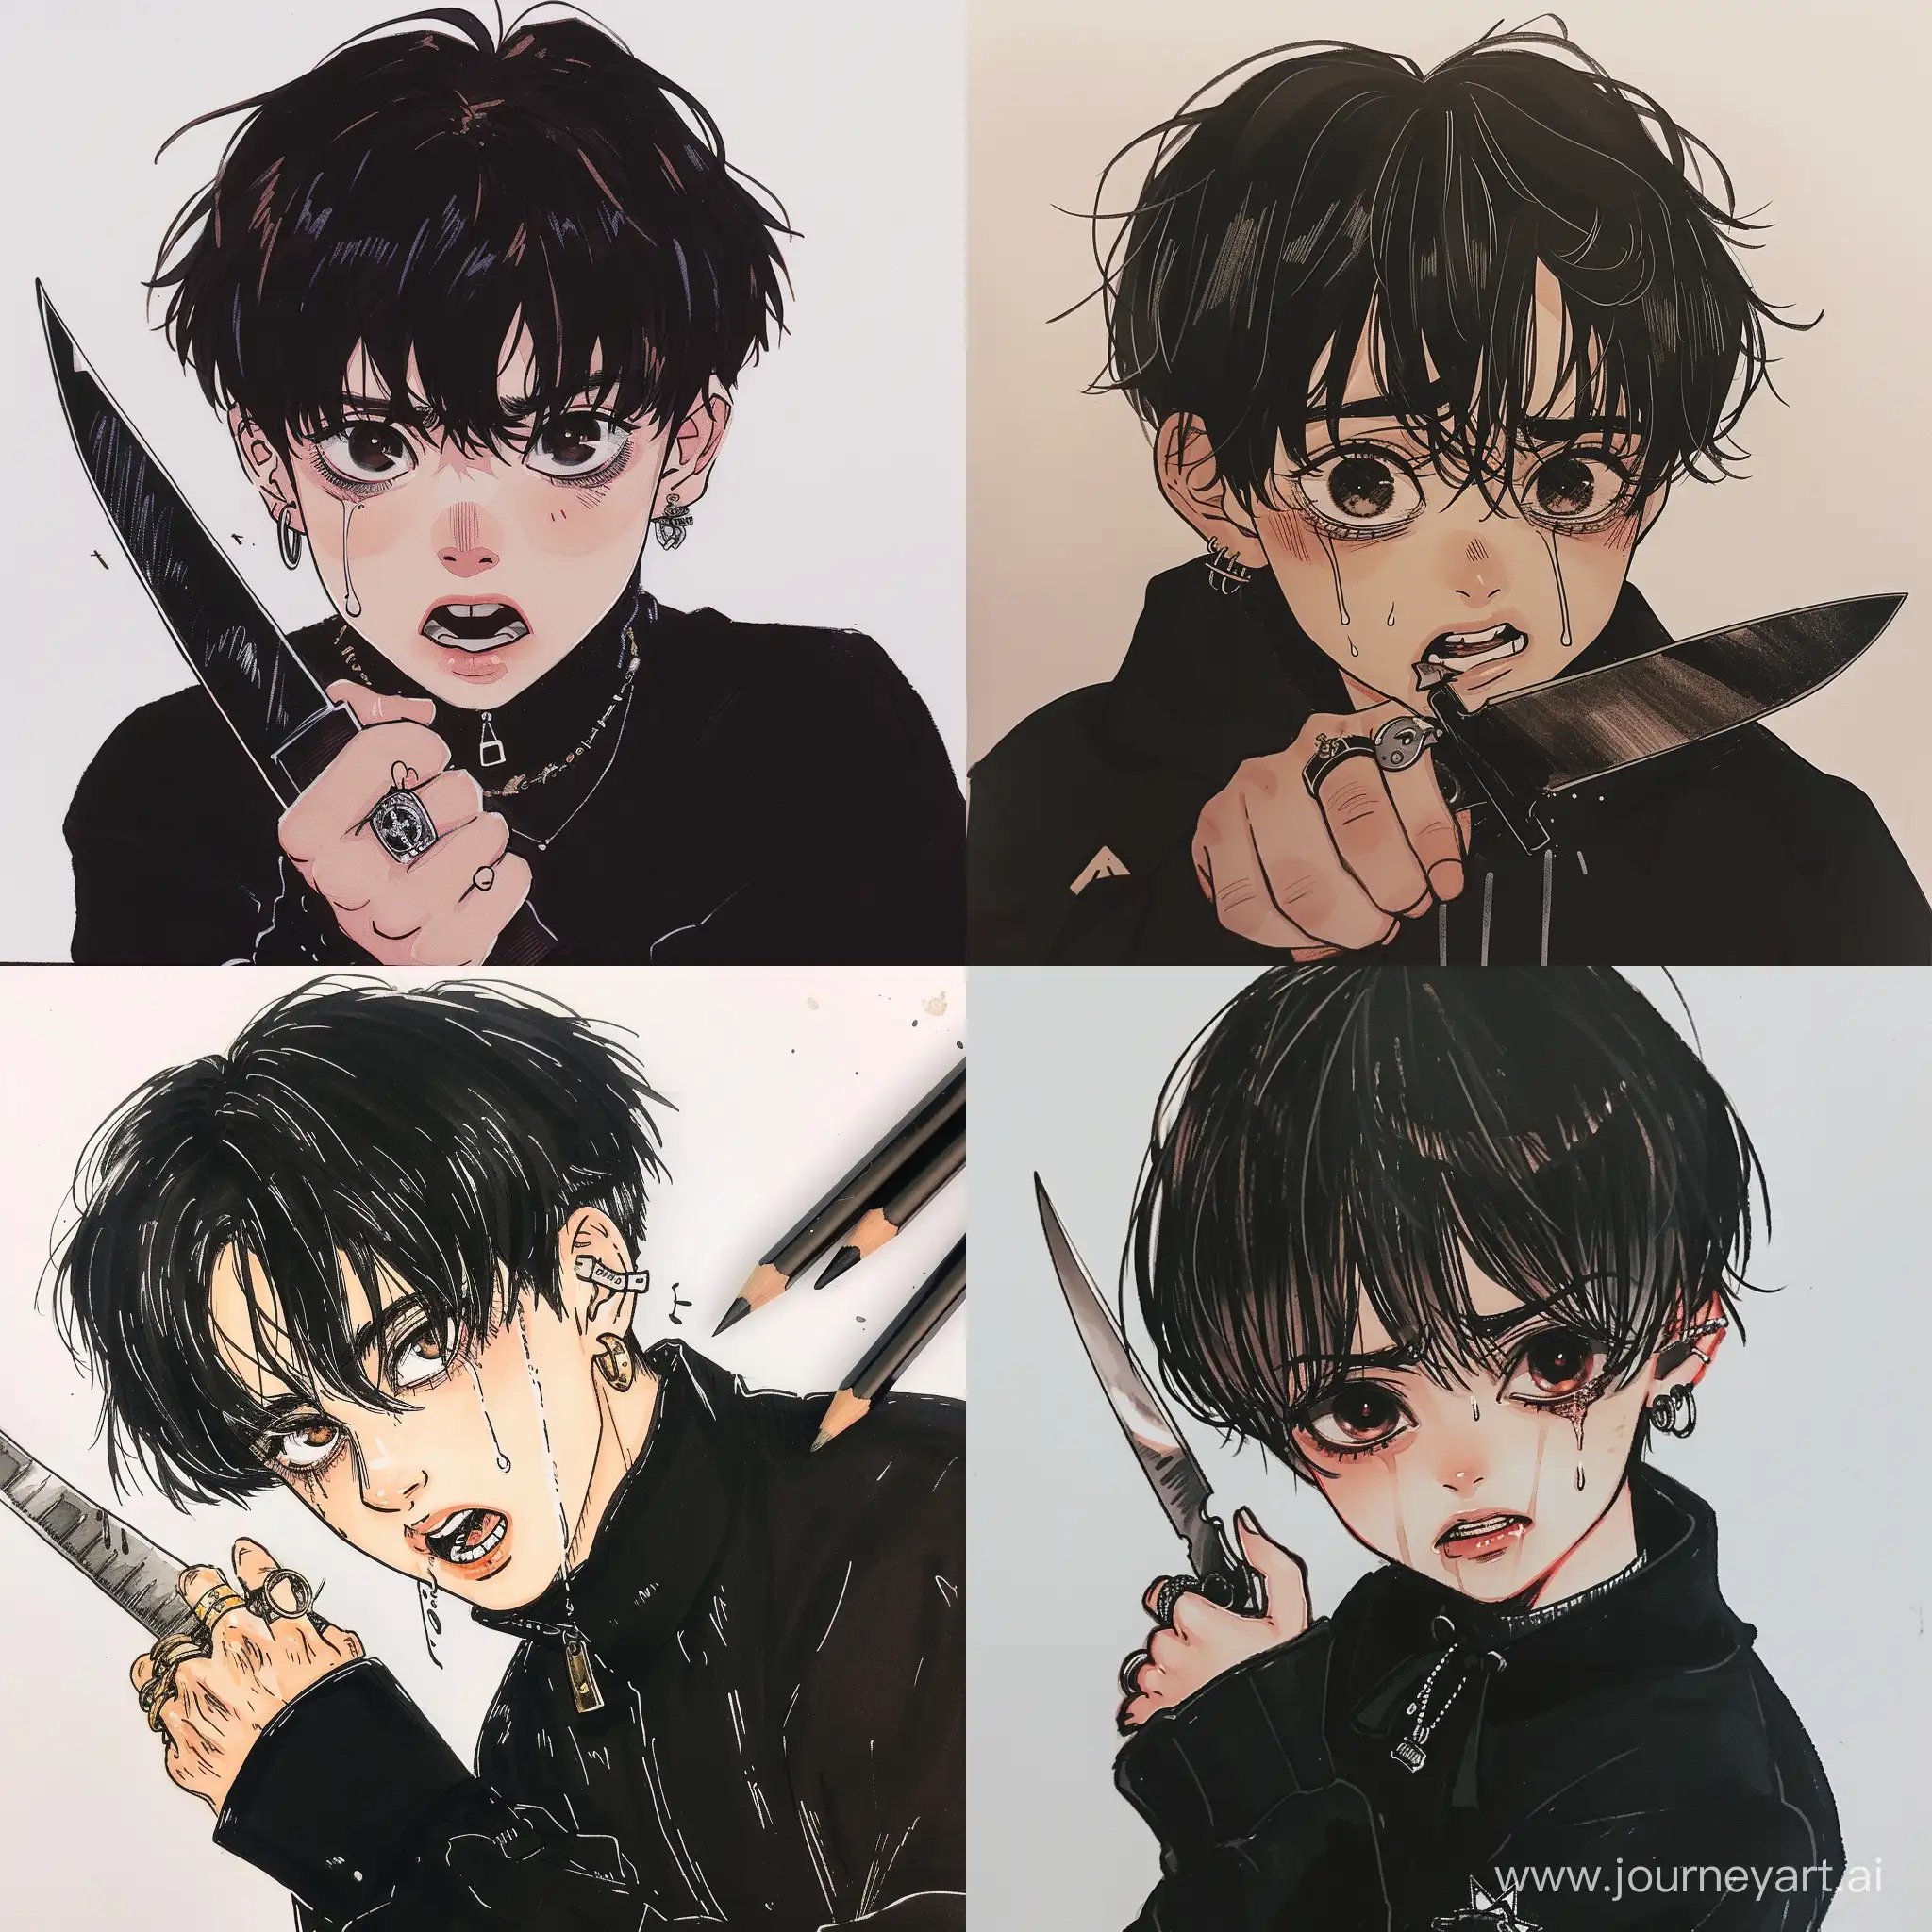 a 18 years old, boy, holding a knife, looking scared, black hair, aesthetic, brown eyes, closer to camera, black outfit, rings, teenager, anime drawing